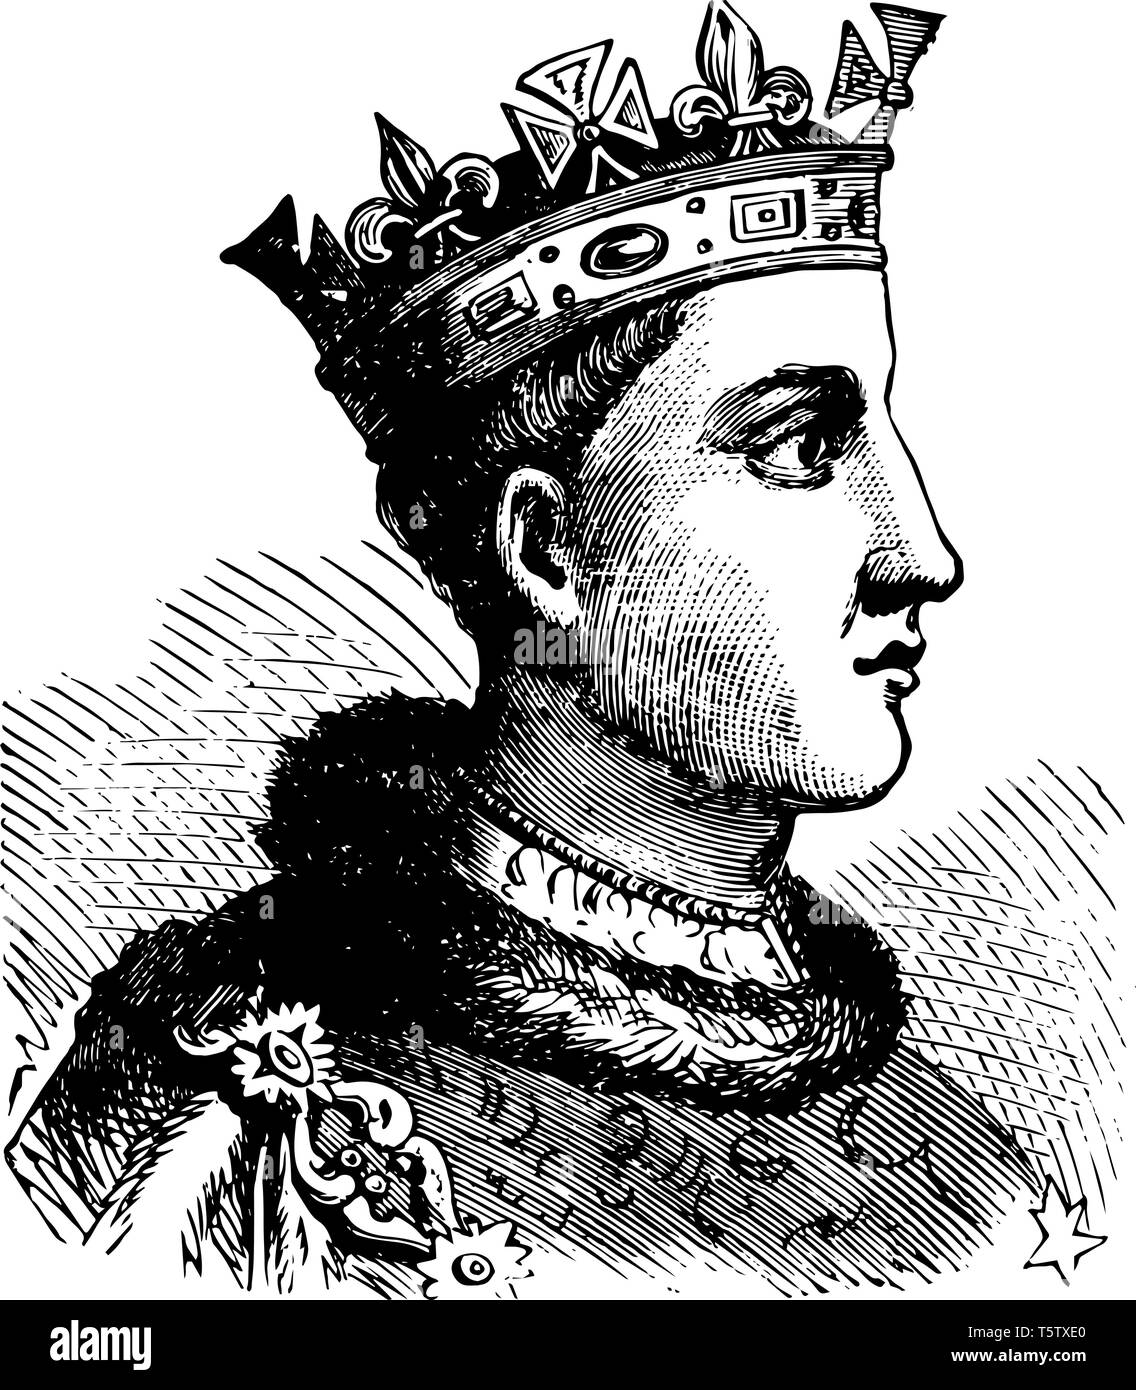 Henry VI of England, 1421-1471, he was the king of England from 1422 to 1461 and from 1470 to 1471, and disputed king of France, vintage line drawing  Stock Vector